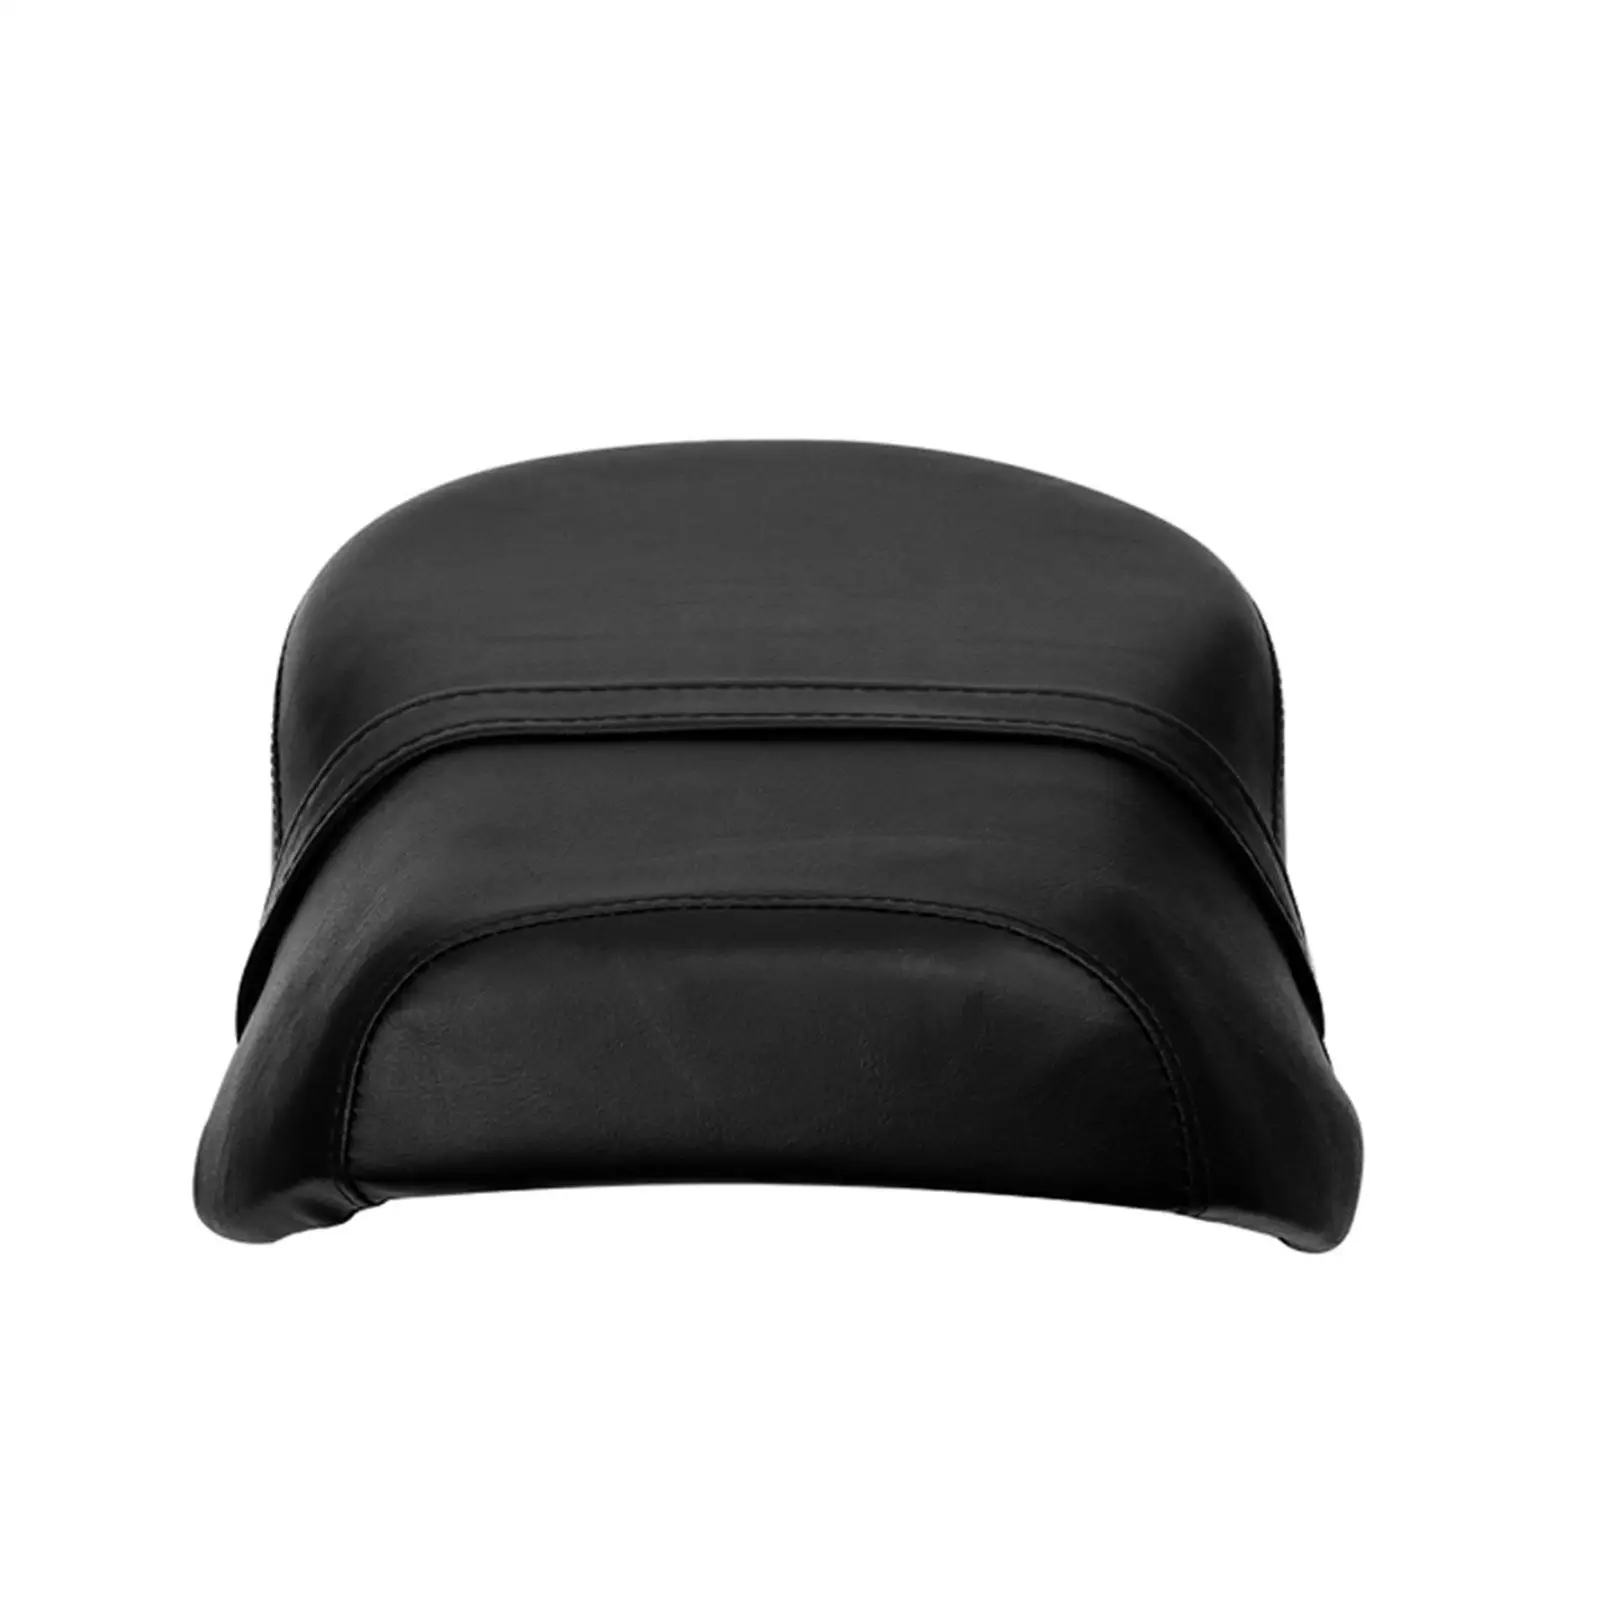 Motorcycle Passenger Seat Cushion for Harley Sportster Accessories